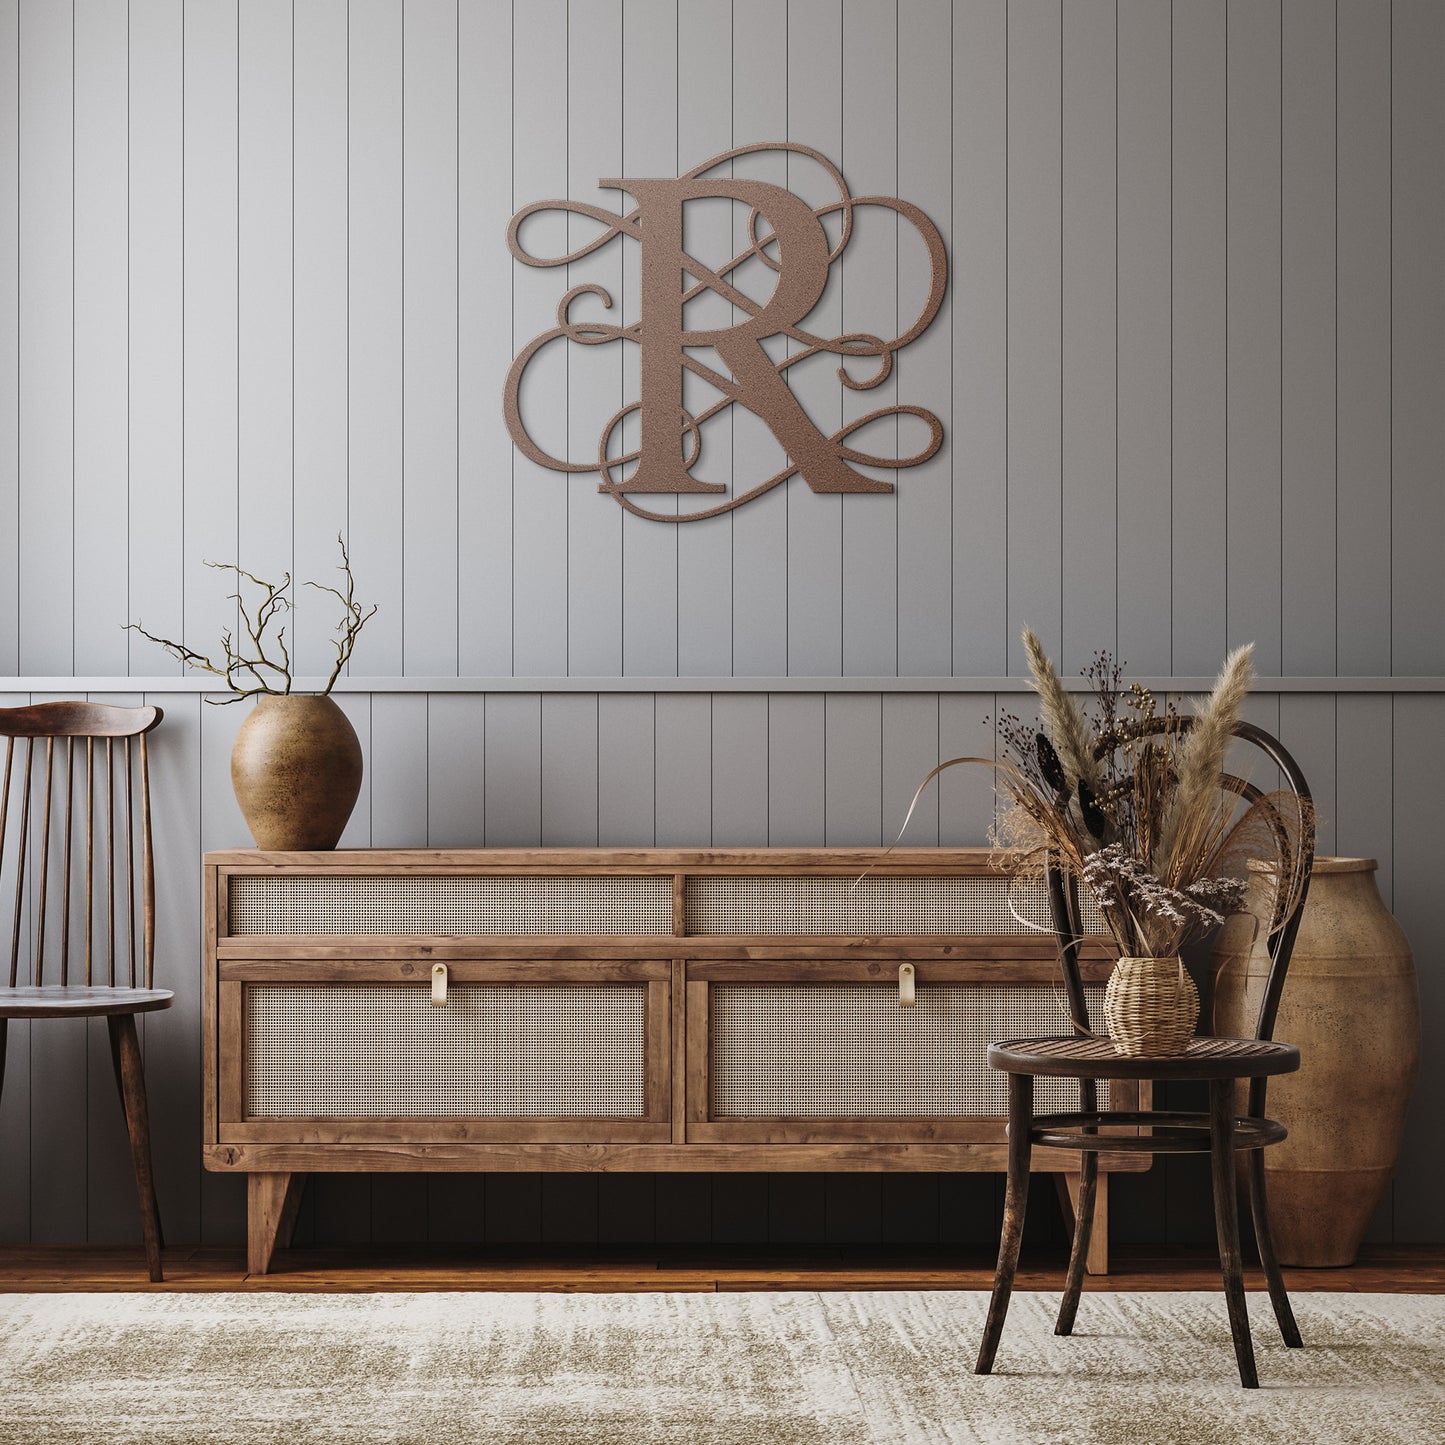 Letter R, Your Initial, Swirl Letters, Monogram, Metal Signs, Rustic Sign, Wall Art, Wall Decor